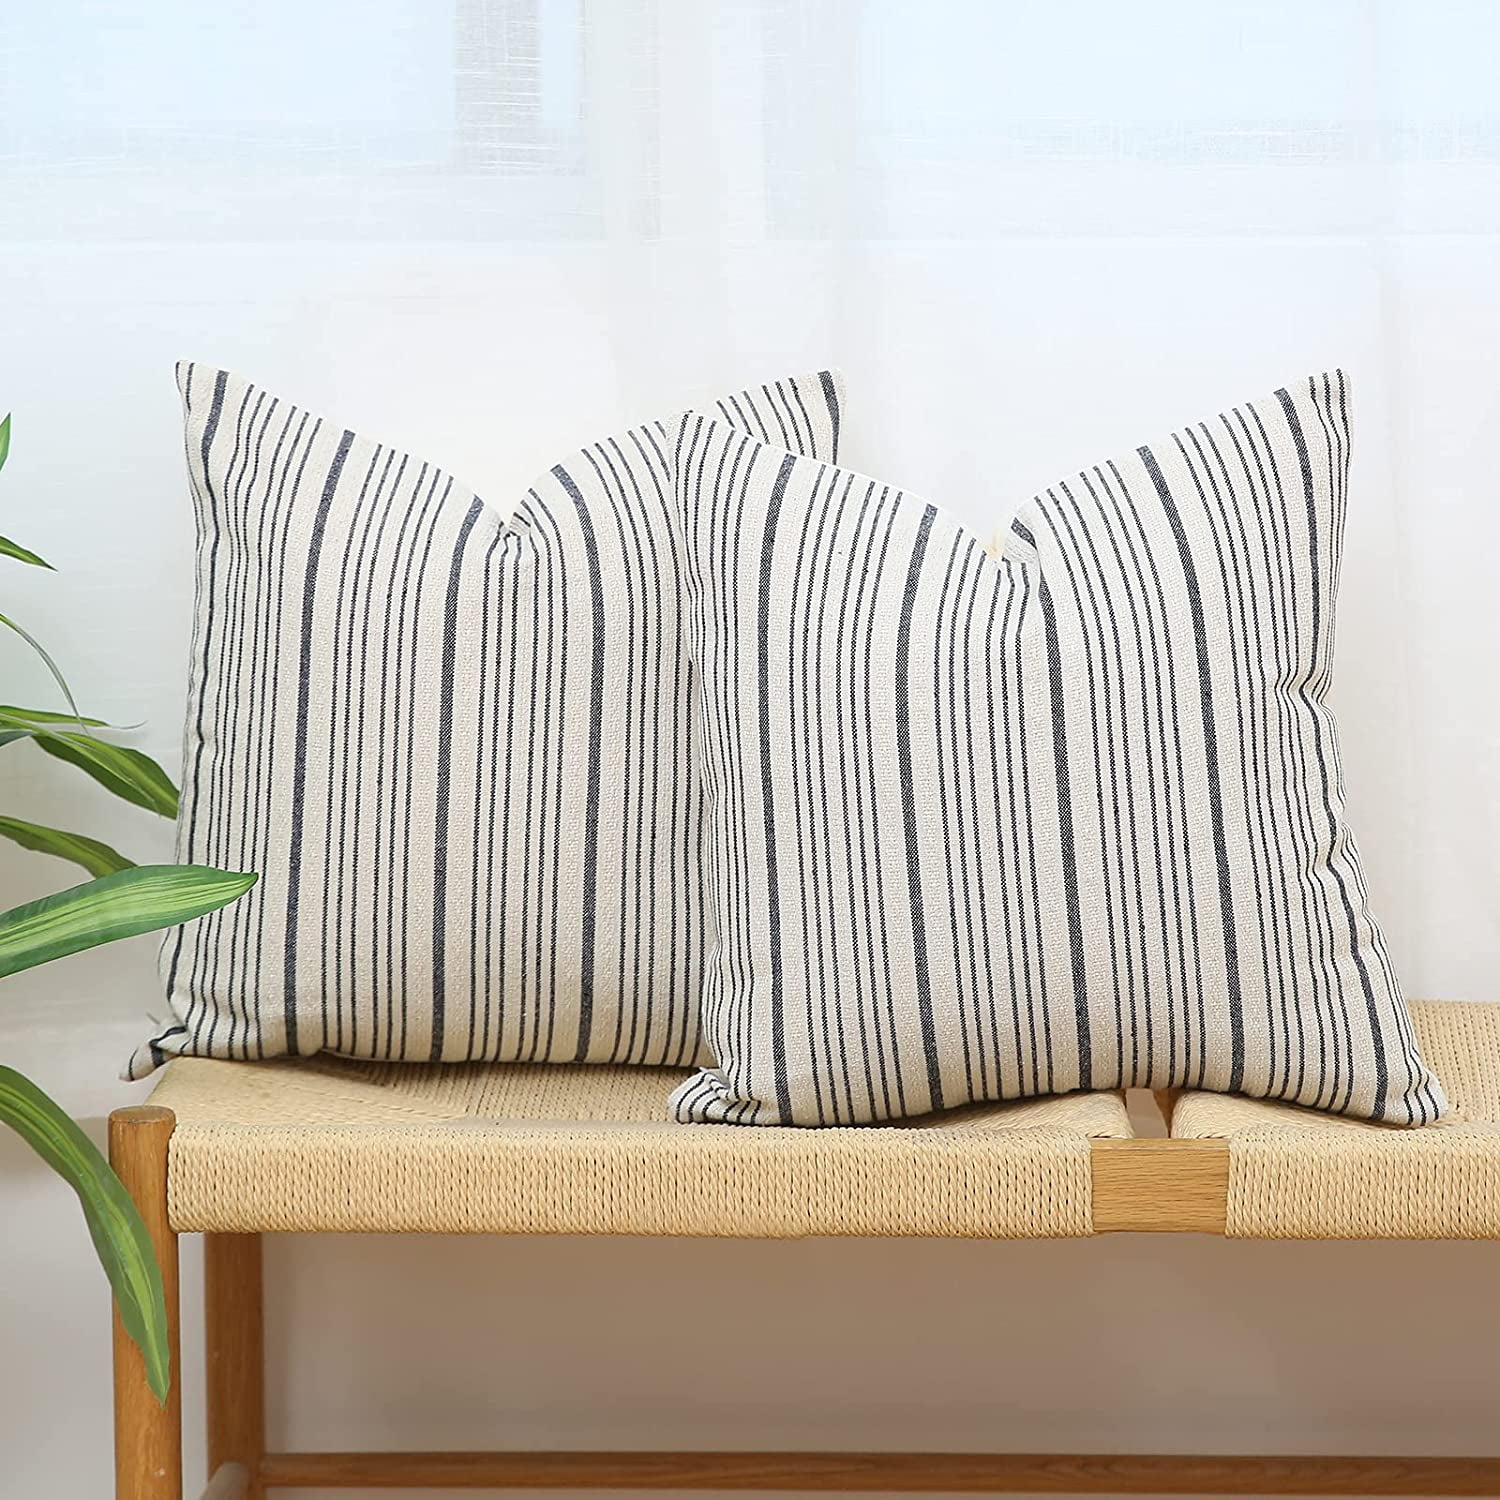 2 Pack Cool Stripe Check Pillow Cases Soft Linen Square Decorative Throw Cushion Cover Pillowcase with Hidden Zipper for Sofa 12  x 20  Gray Multi Color